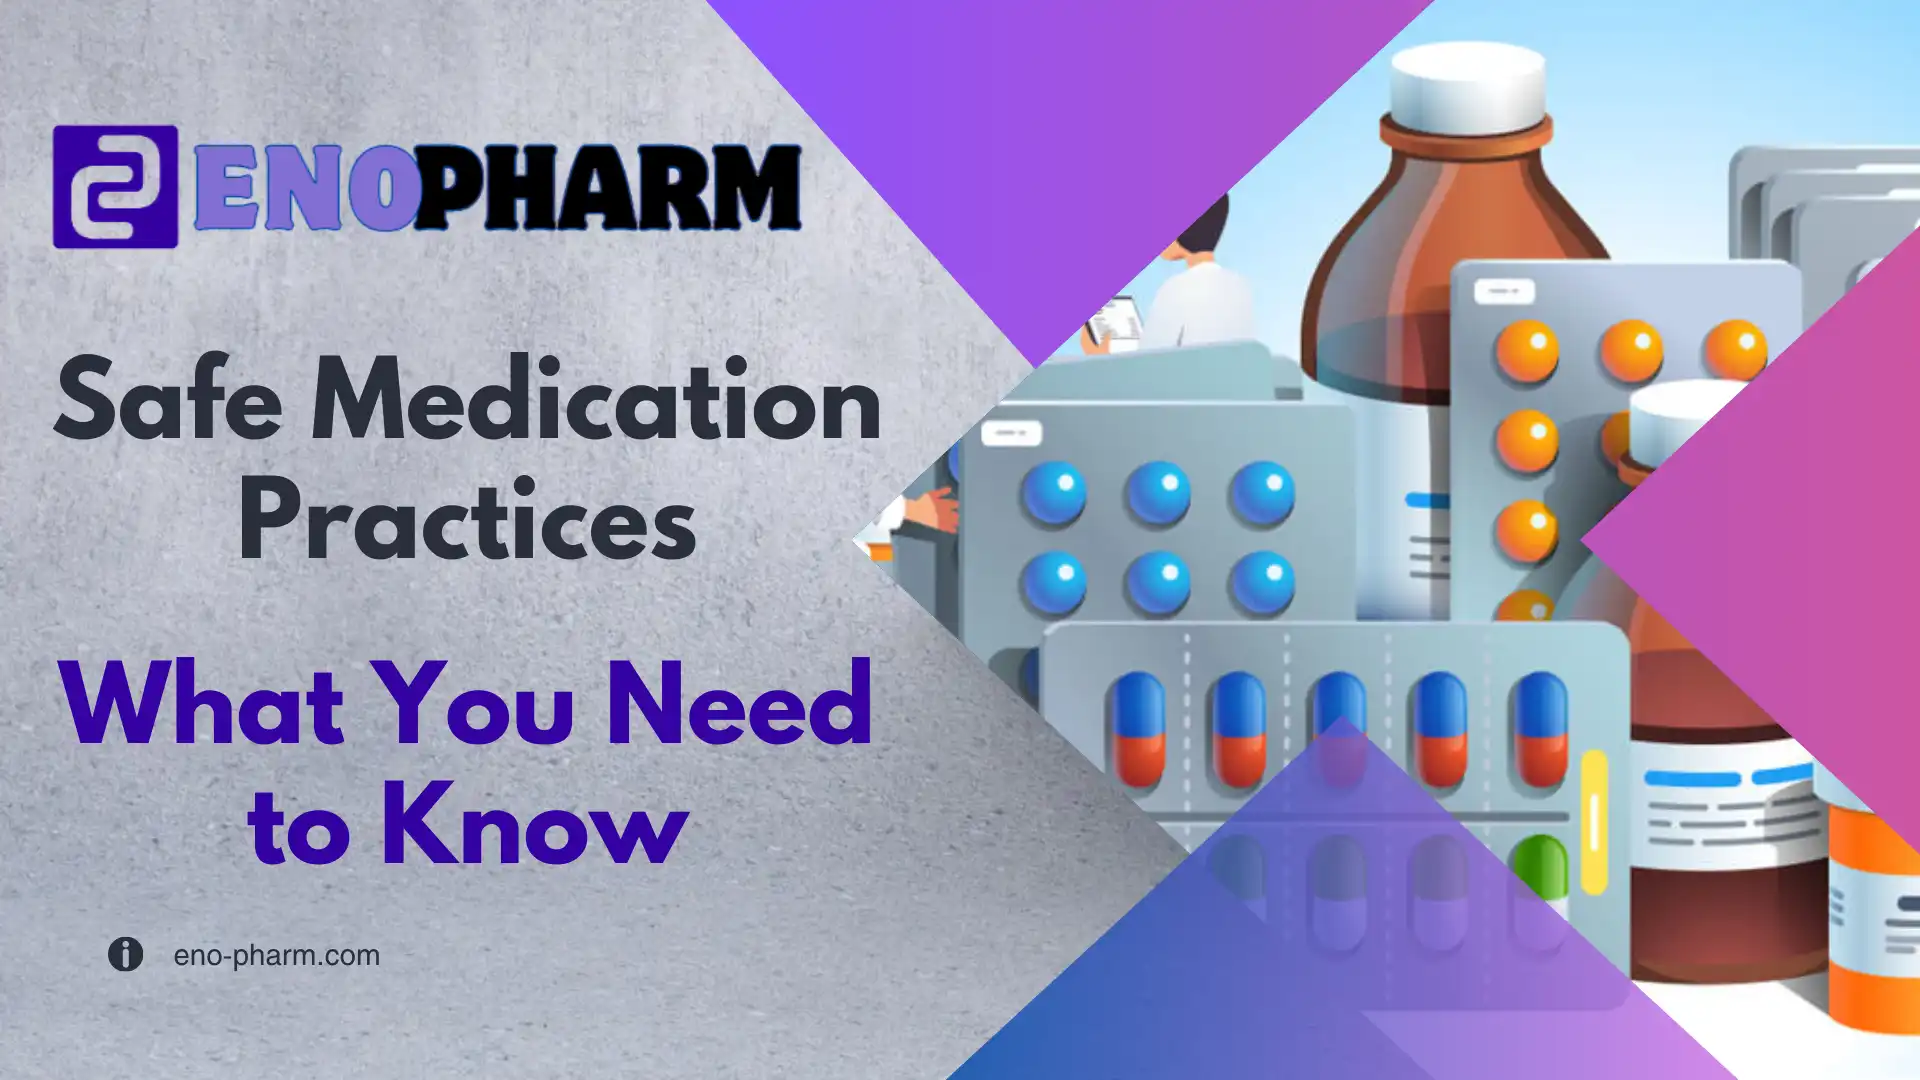 Safe Medication Practices: What You Need to Know